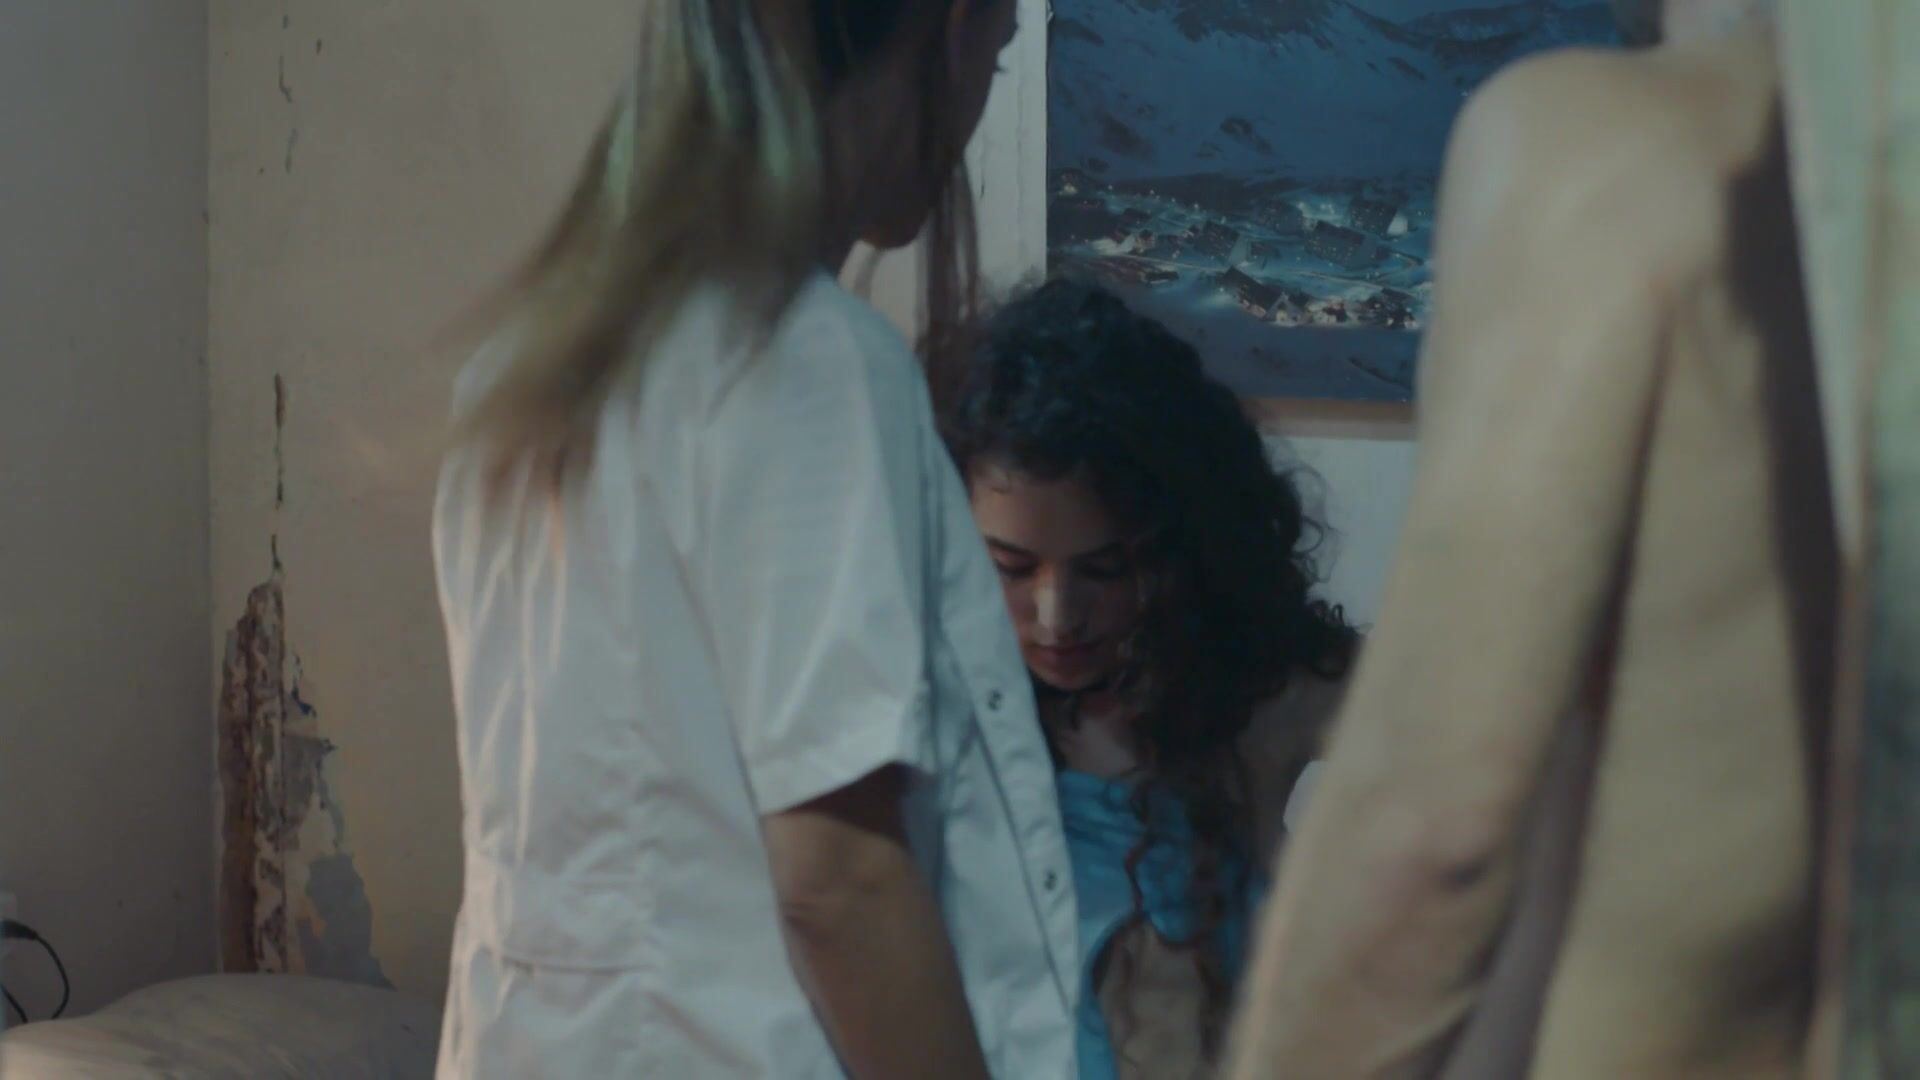 The Antonella Ferrari and others go naked in El Marginal s2e05-08 (2018) FPO.XXX - 1